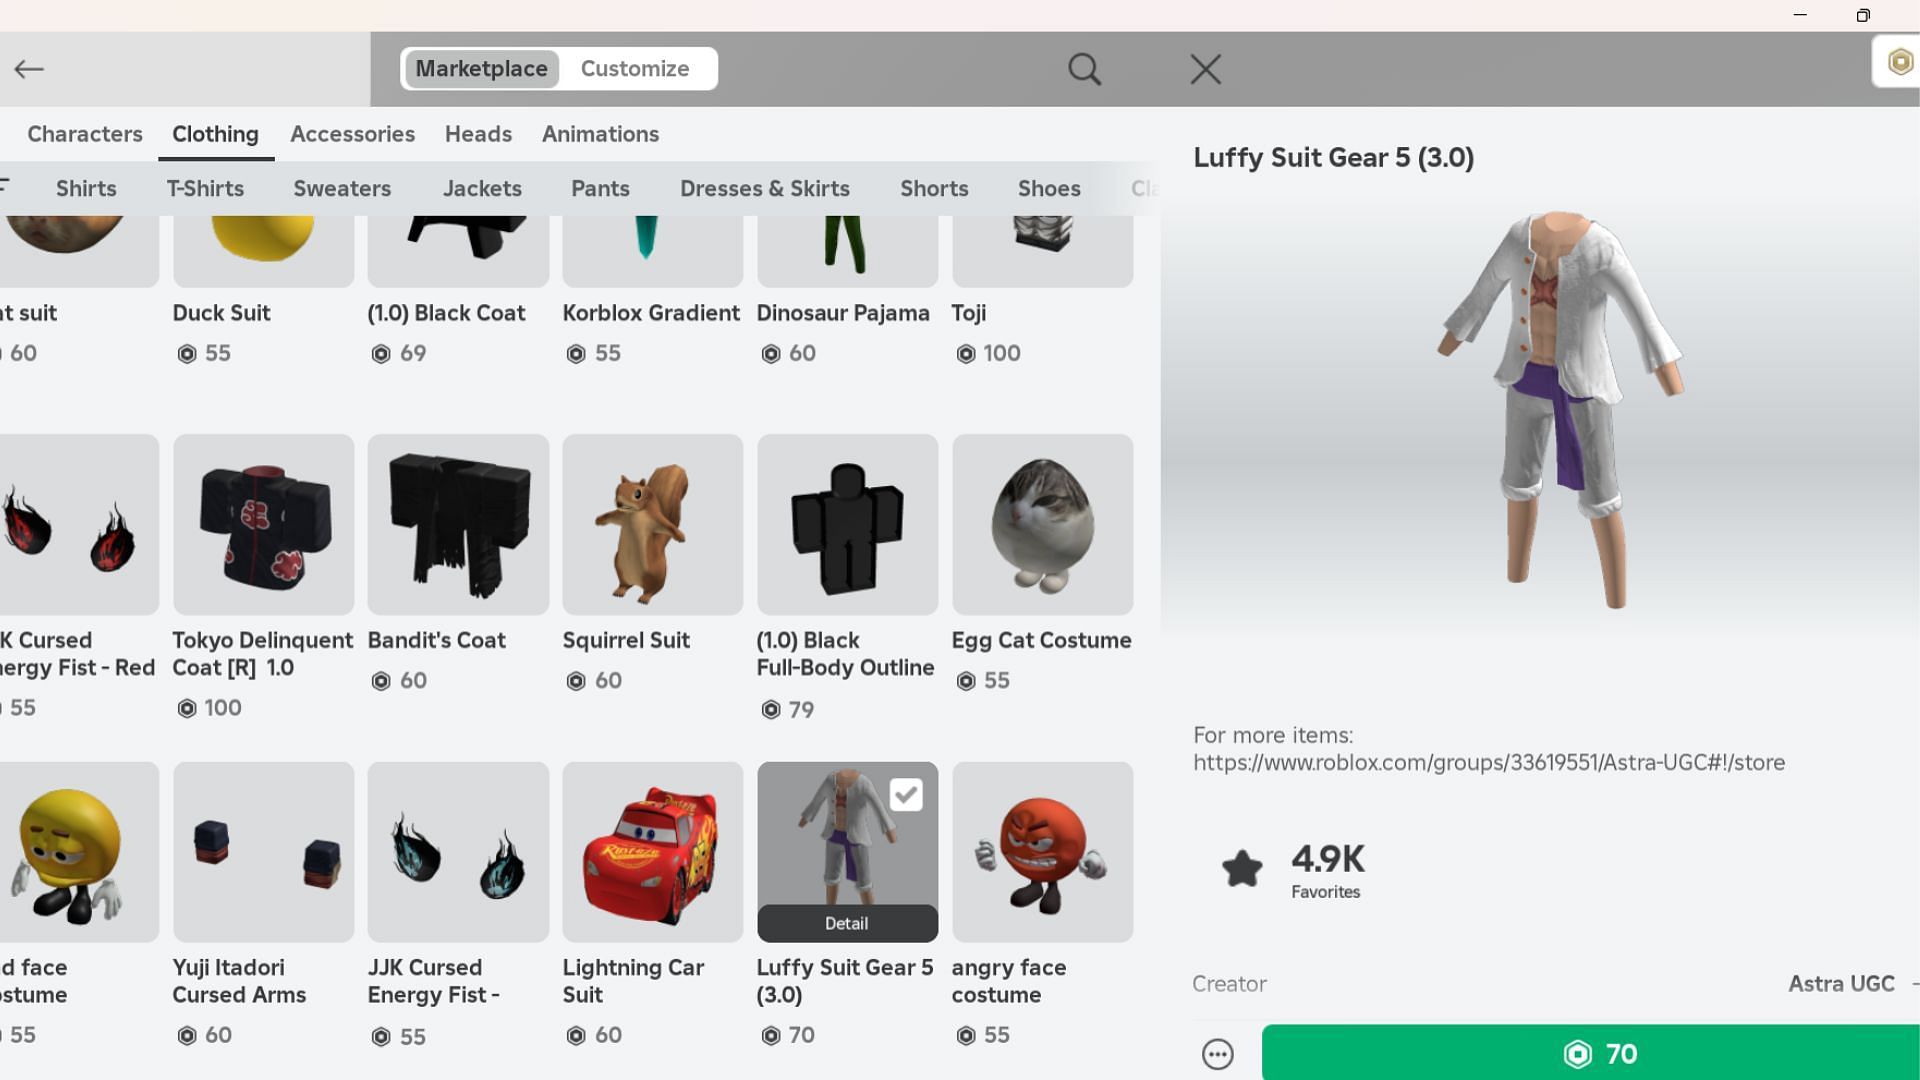 You can sell custom clothing to earn money in Roblox (Image via Roblox)